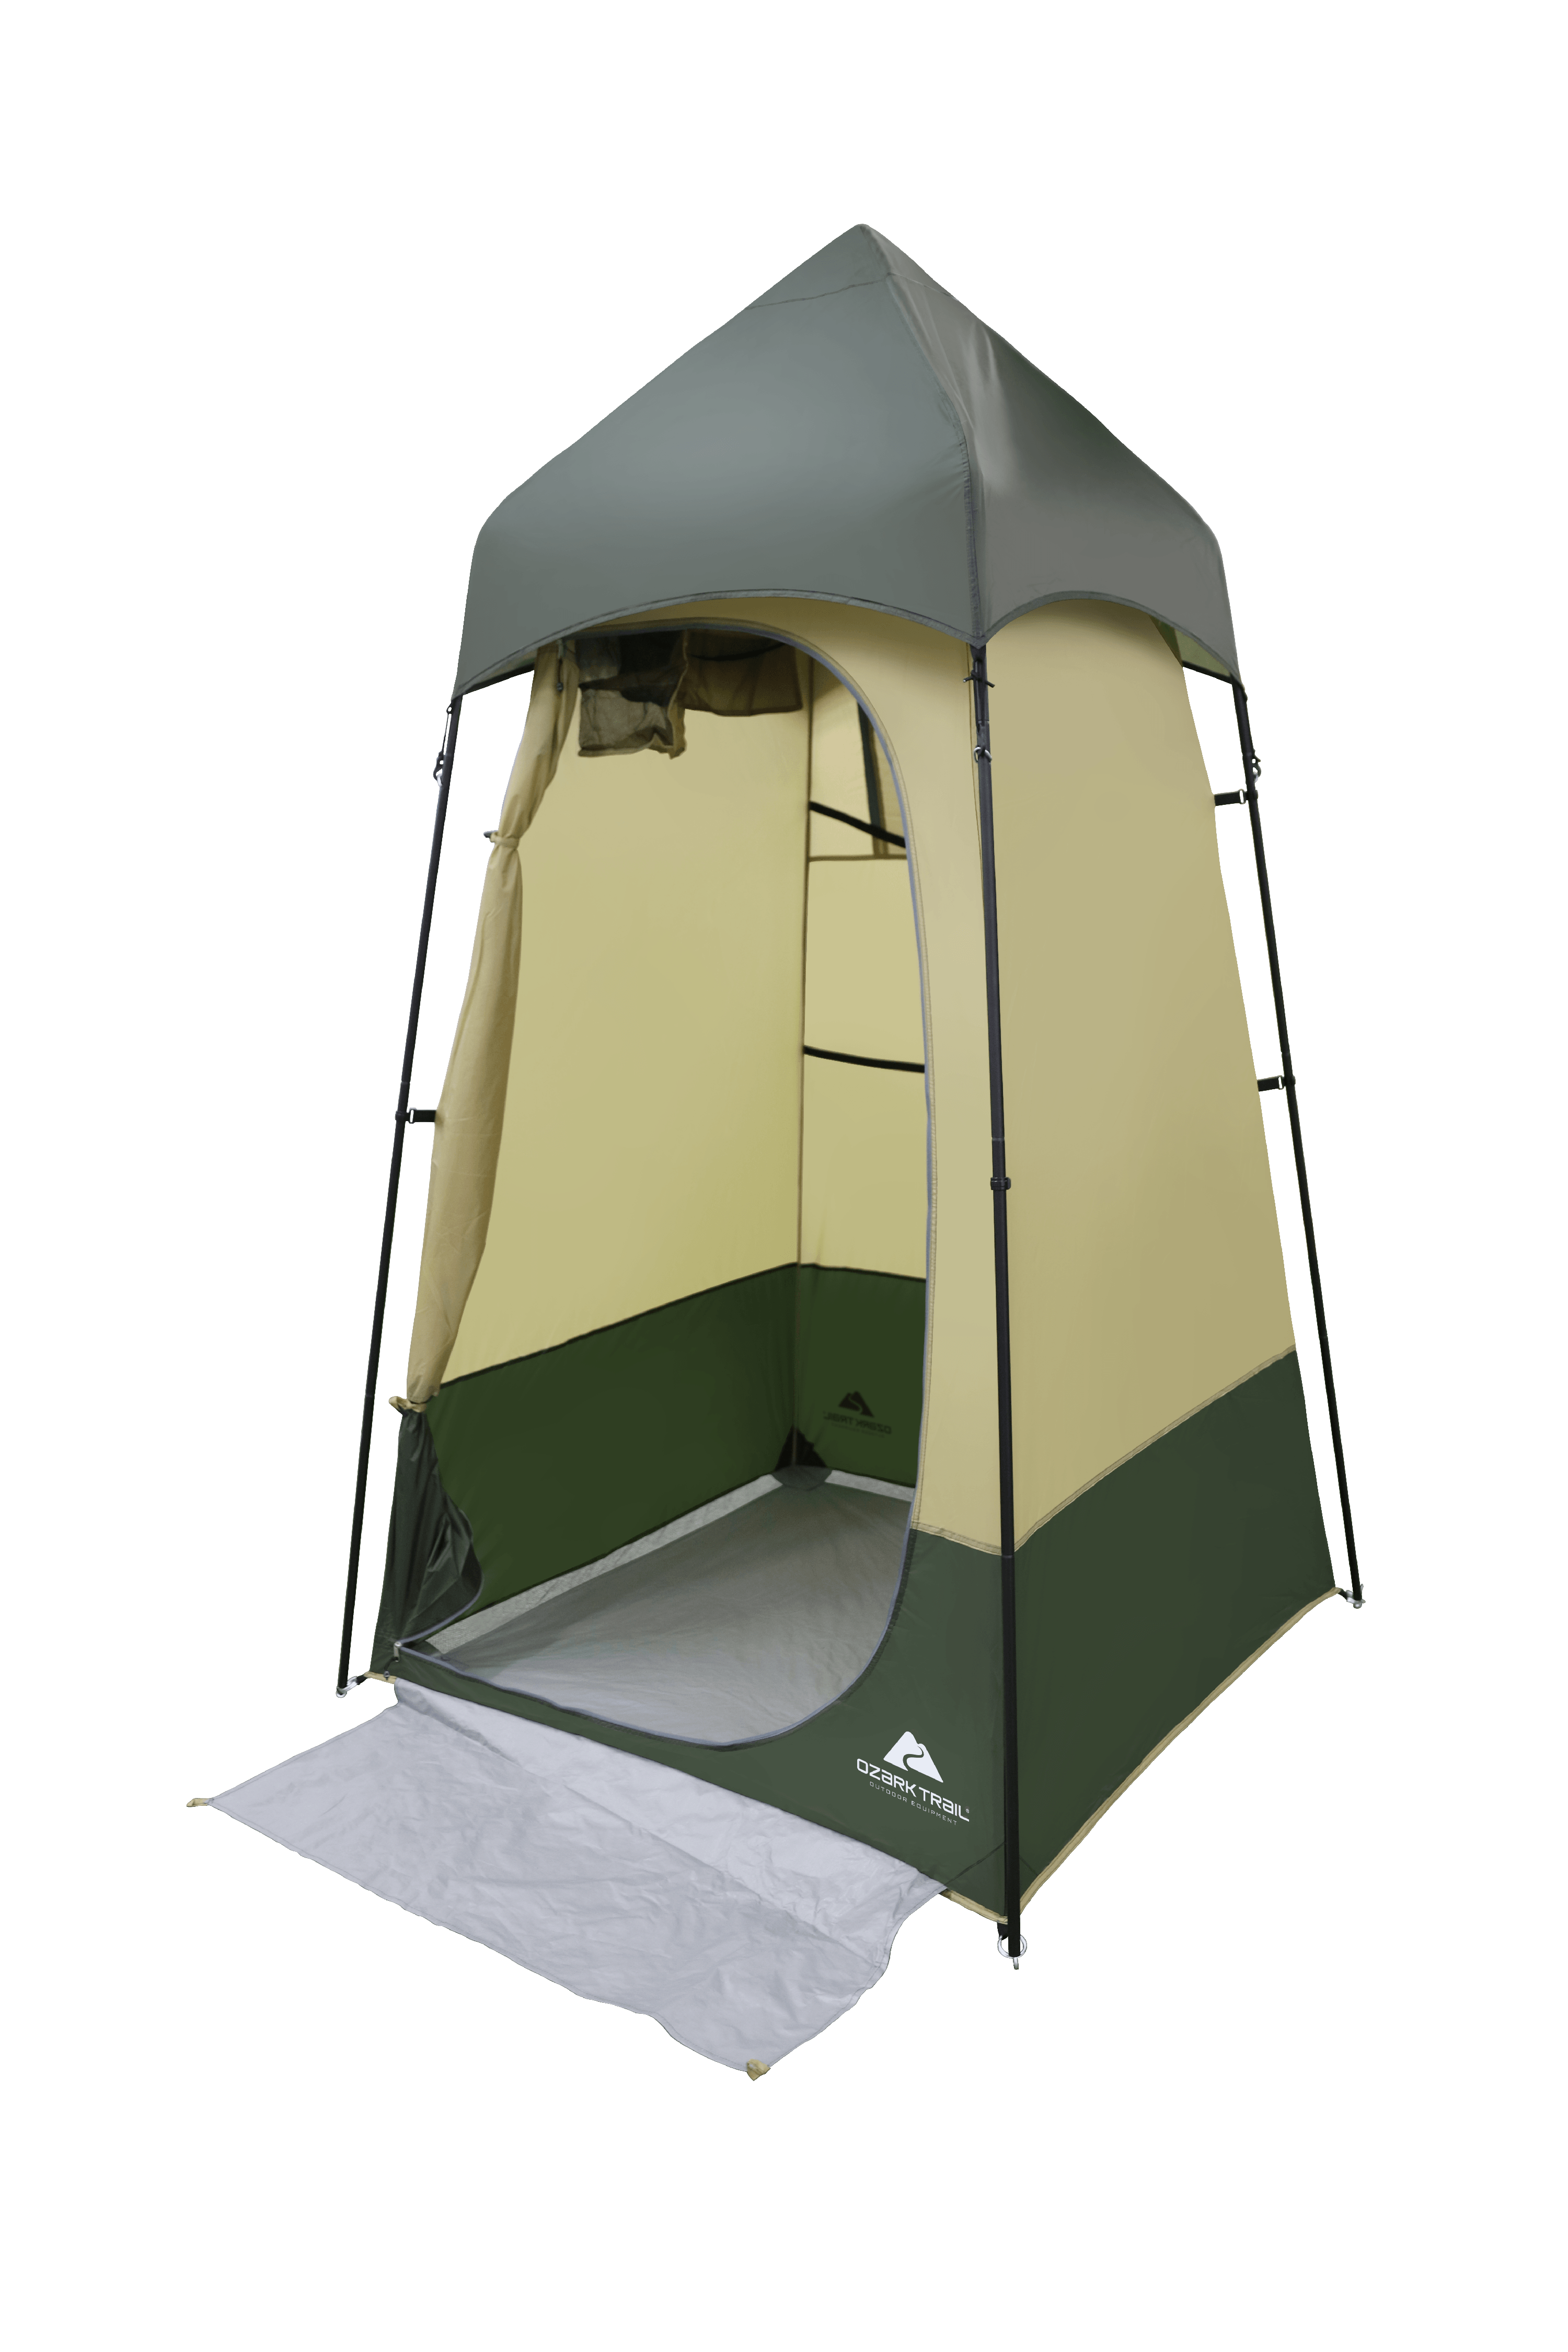 Ozark Trail Hazel Creek Lighted Privacy Tent One Room, Green - image 1 of 10